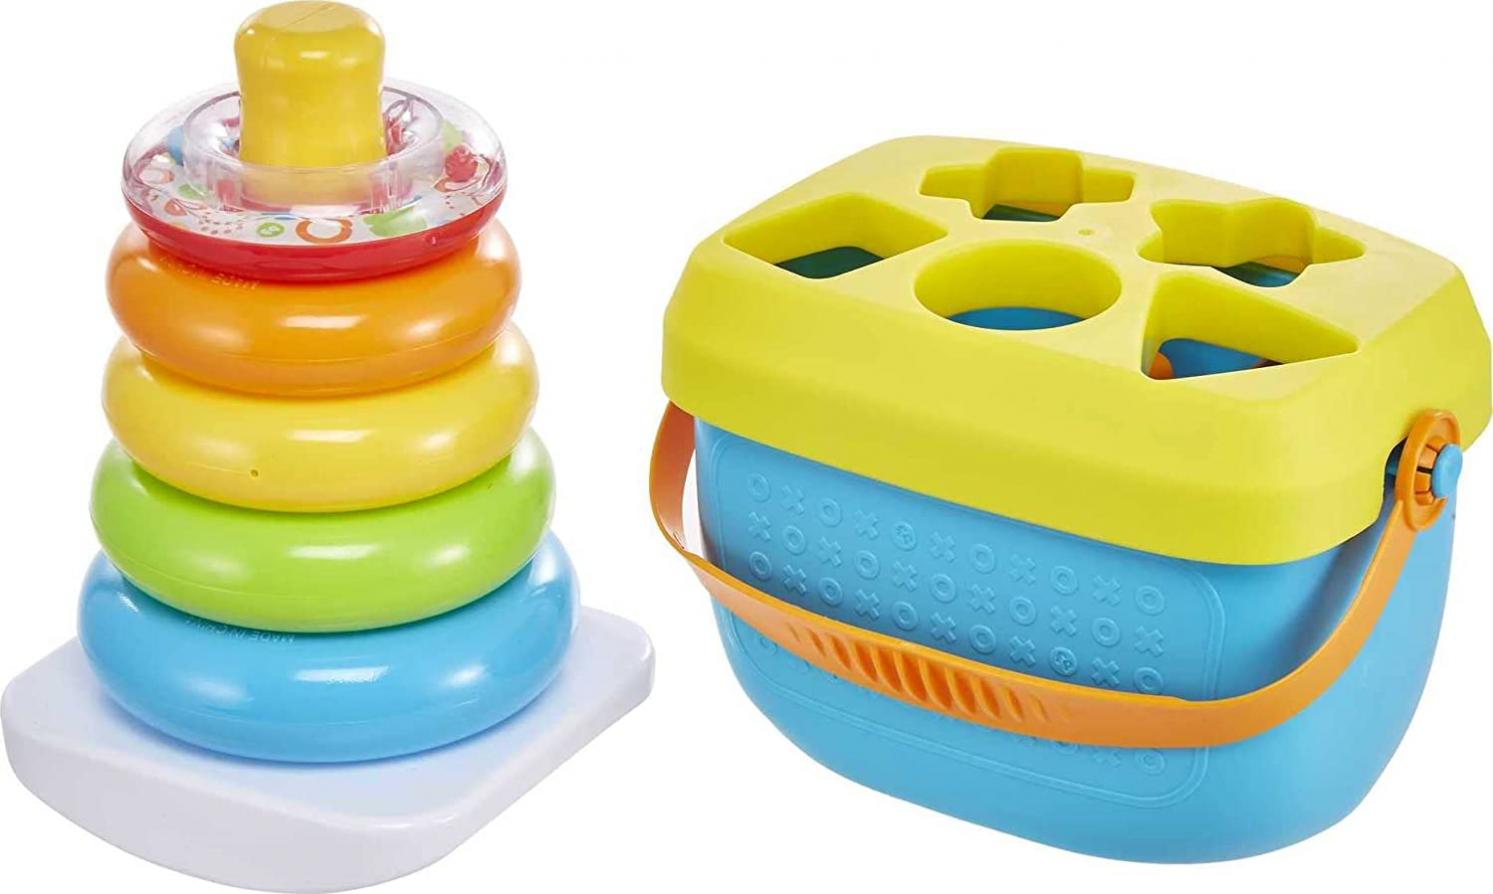 Fisher-Price Baby Toy Gift Set with Rock-a-Stack Ring Stacking Toy and Baby’s First Blocks Set, Frustration-Free Packaging